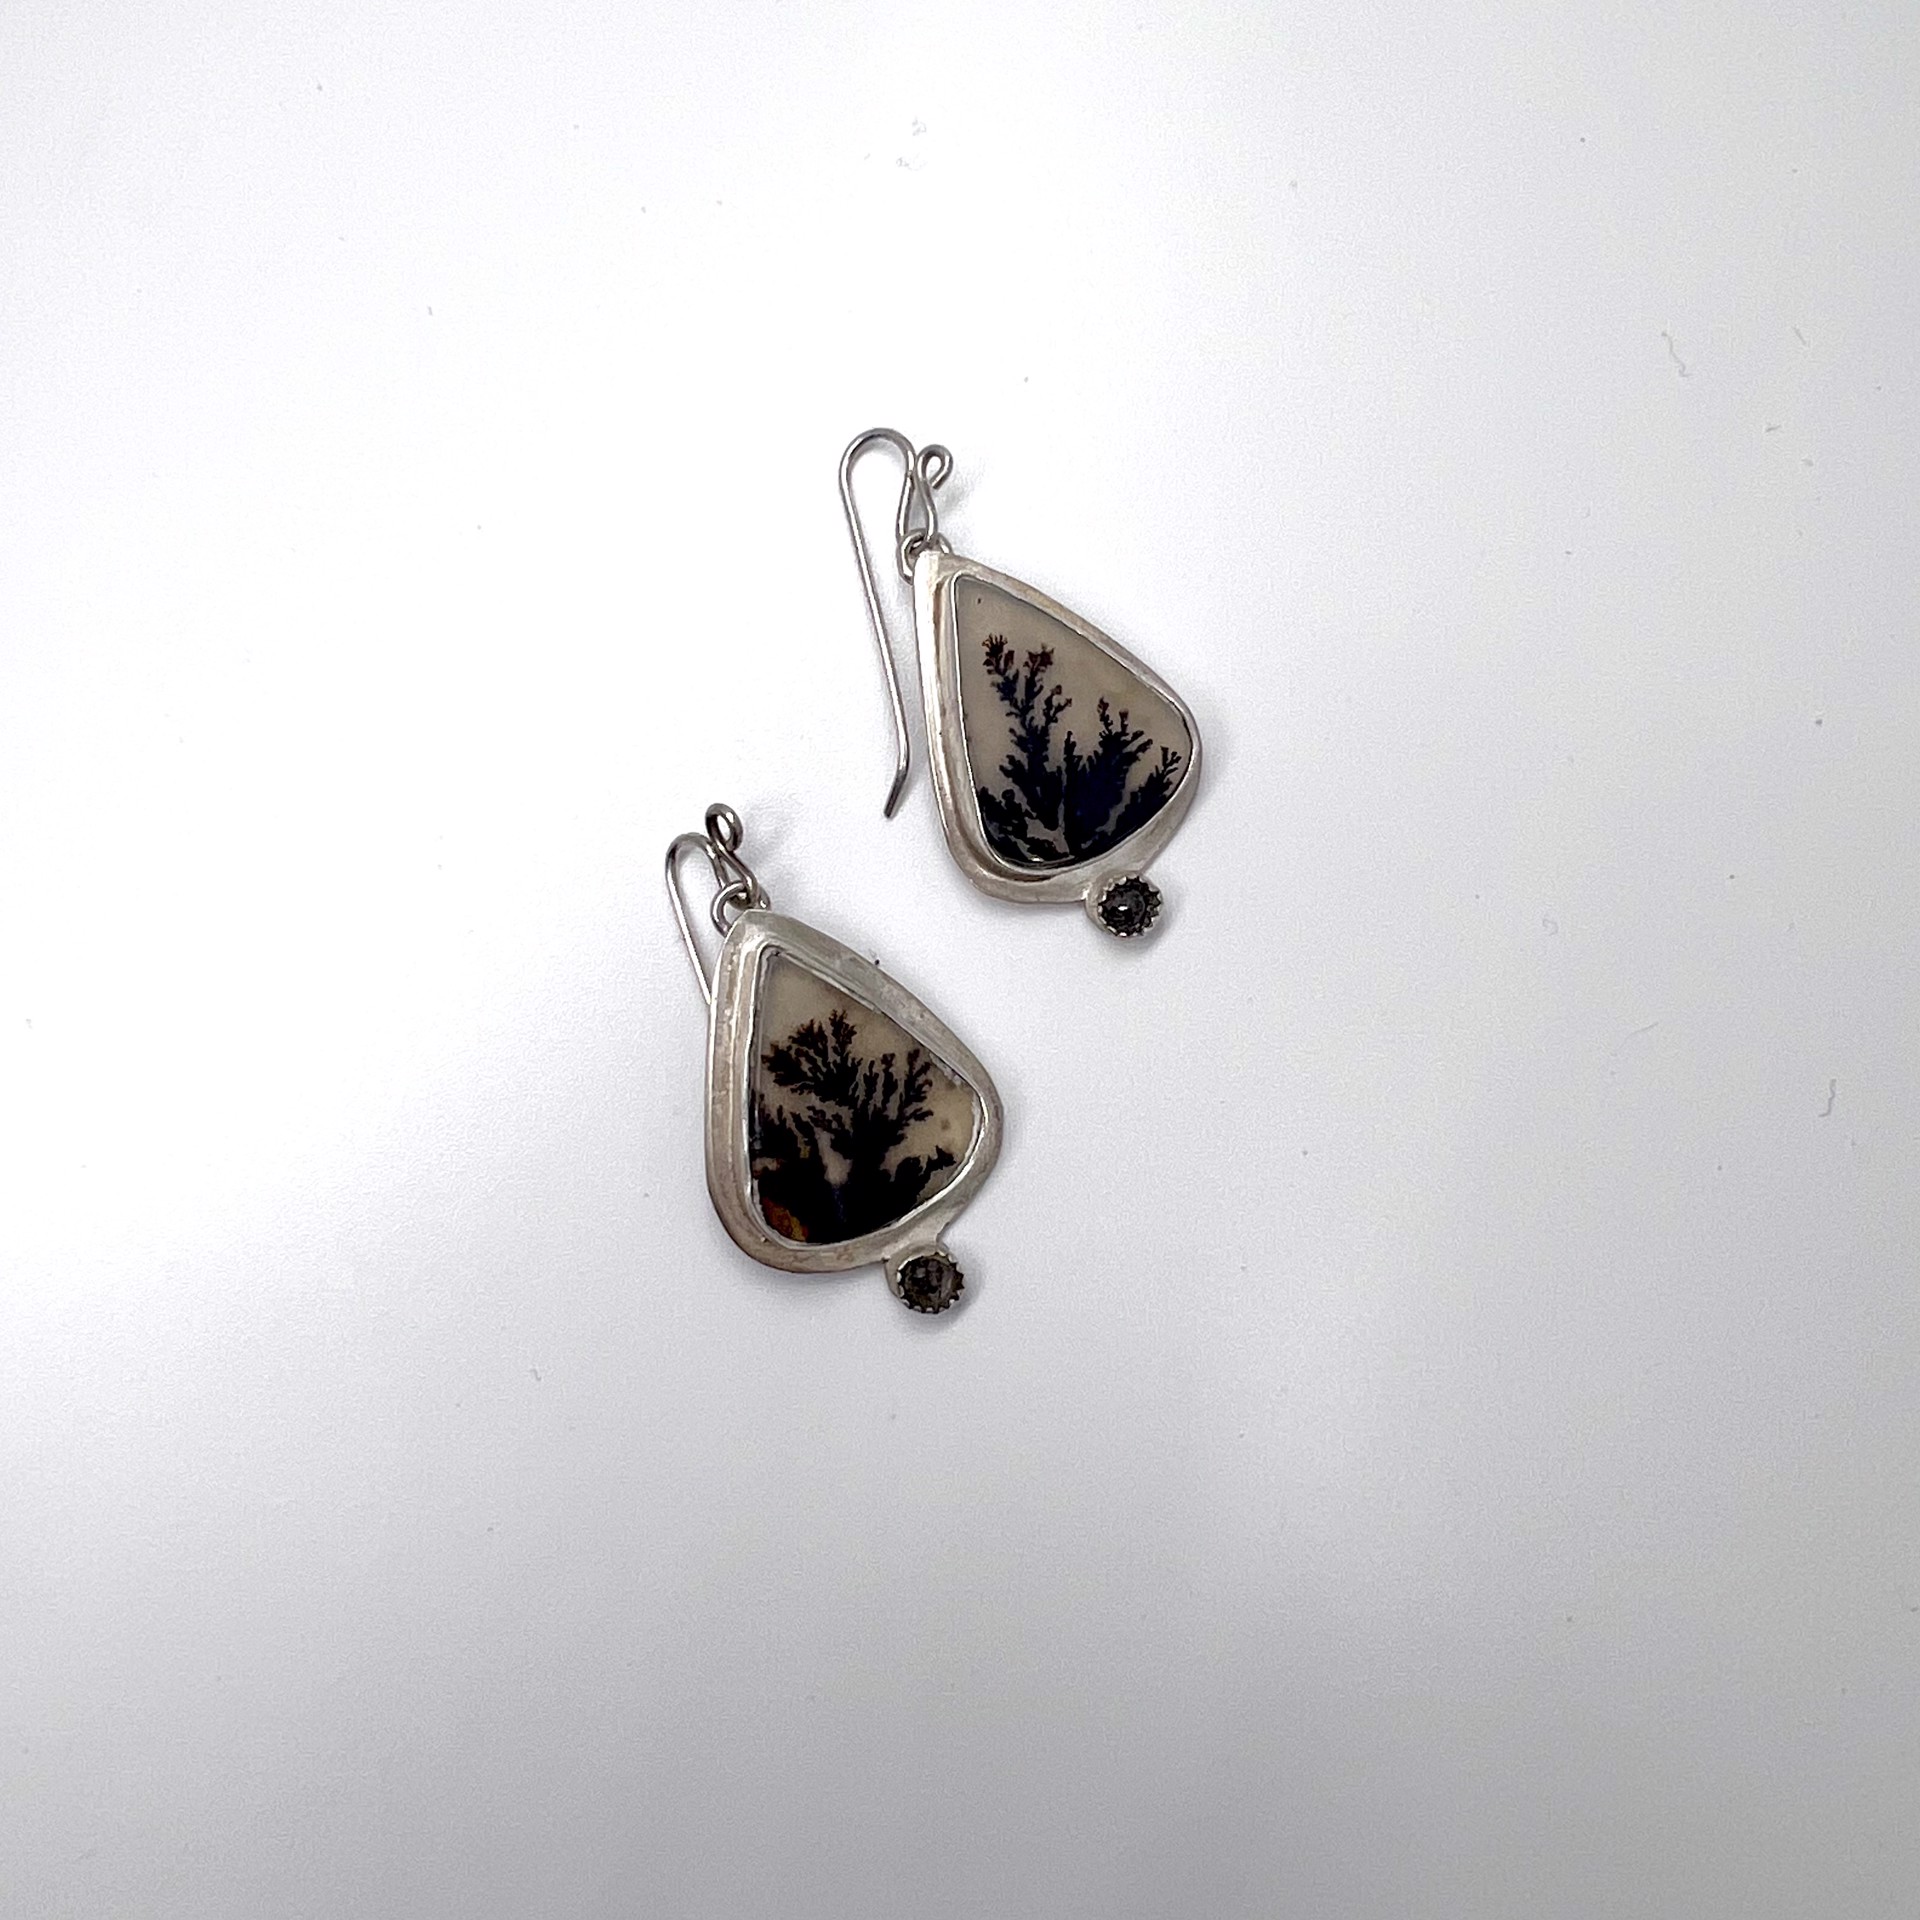 1214 Dendrites Formed in Agate with Diamond Earrings by Suzanne Brown